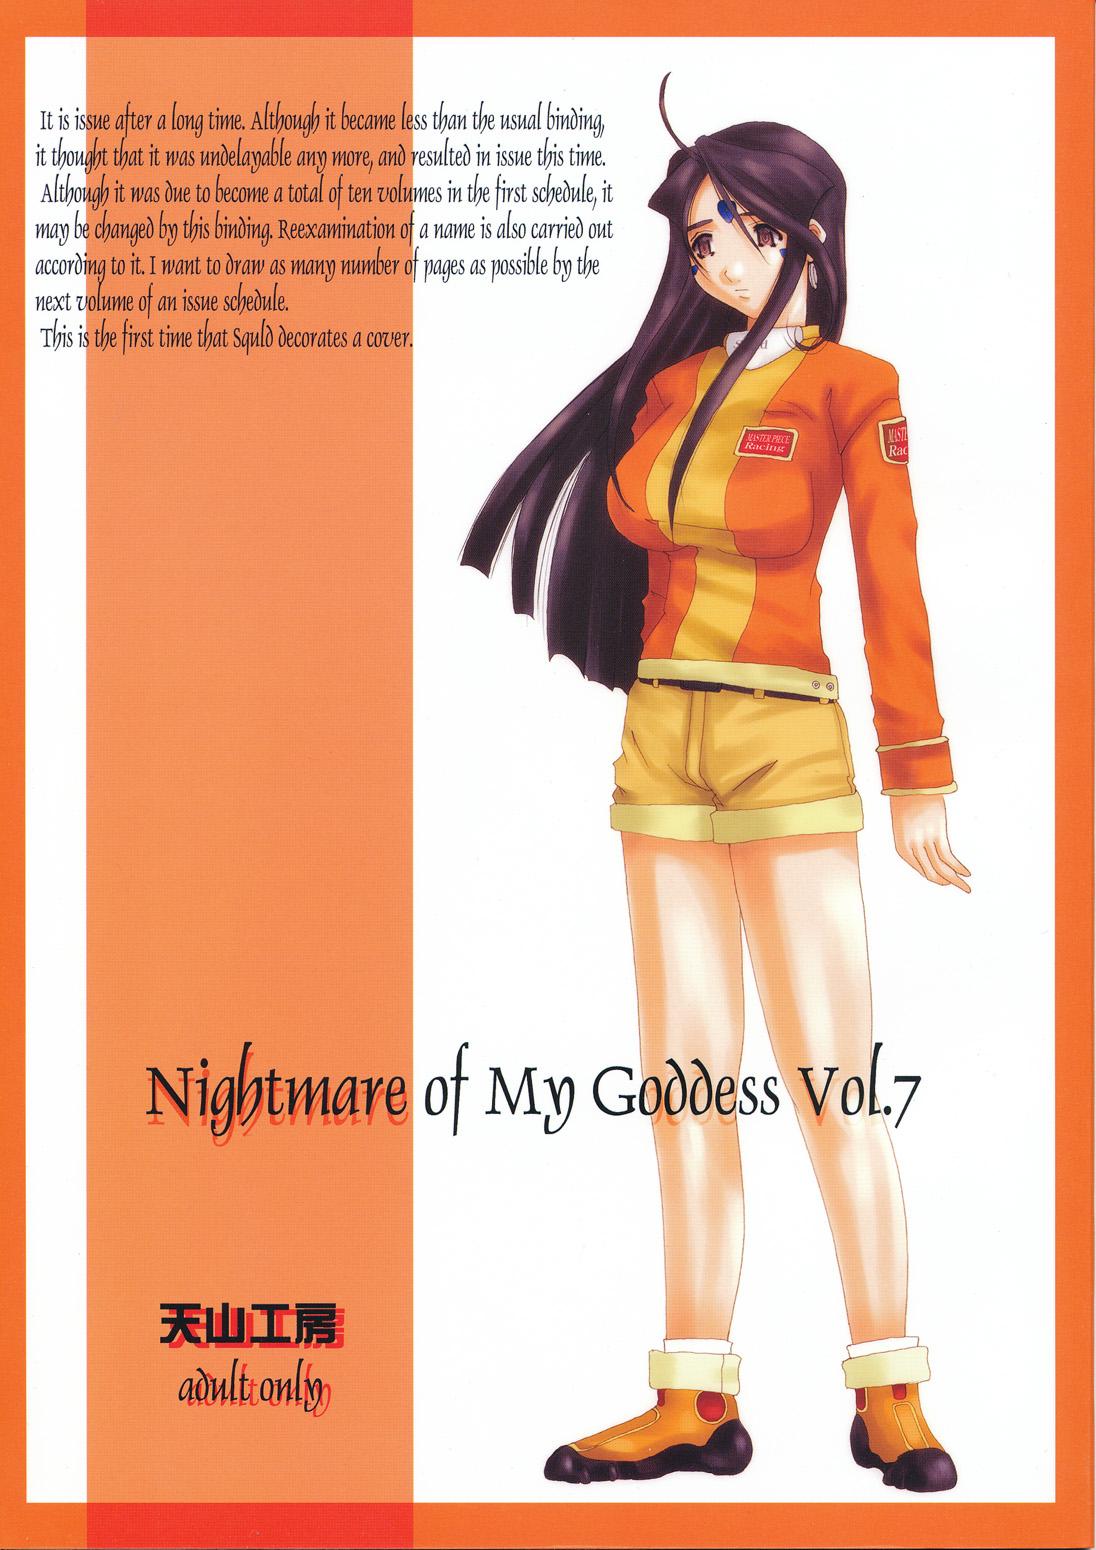 Casting Nightmare of My Goddess Vol. 7 - Ah my goddess Oral Sex - Page 1